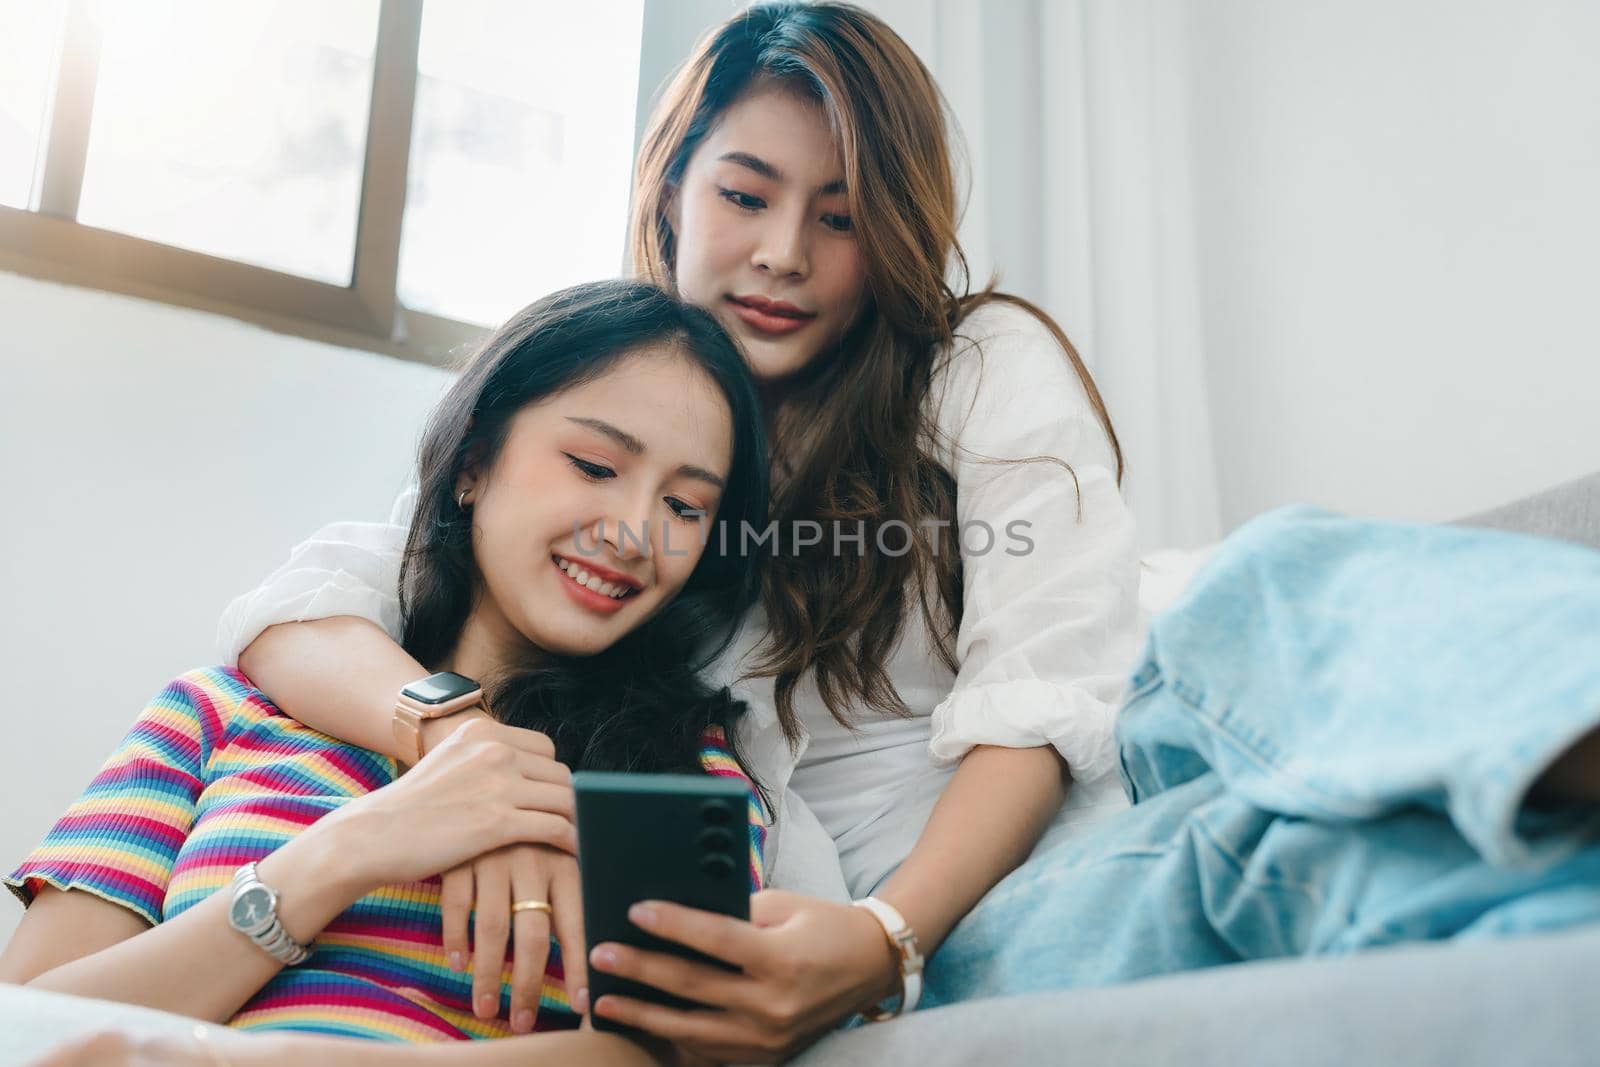 lgbtq, lgbt concept, homosexuality, portrait of two asian women enjoying together and showing love for each other while using smartphone mobile to take selfies by Manastrong